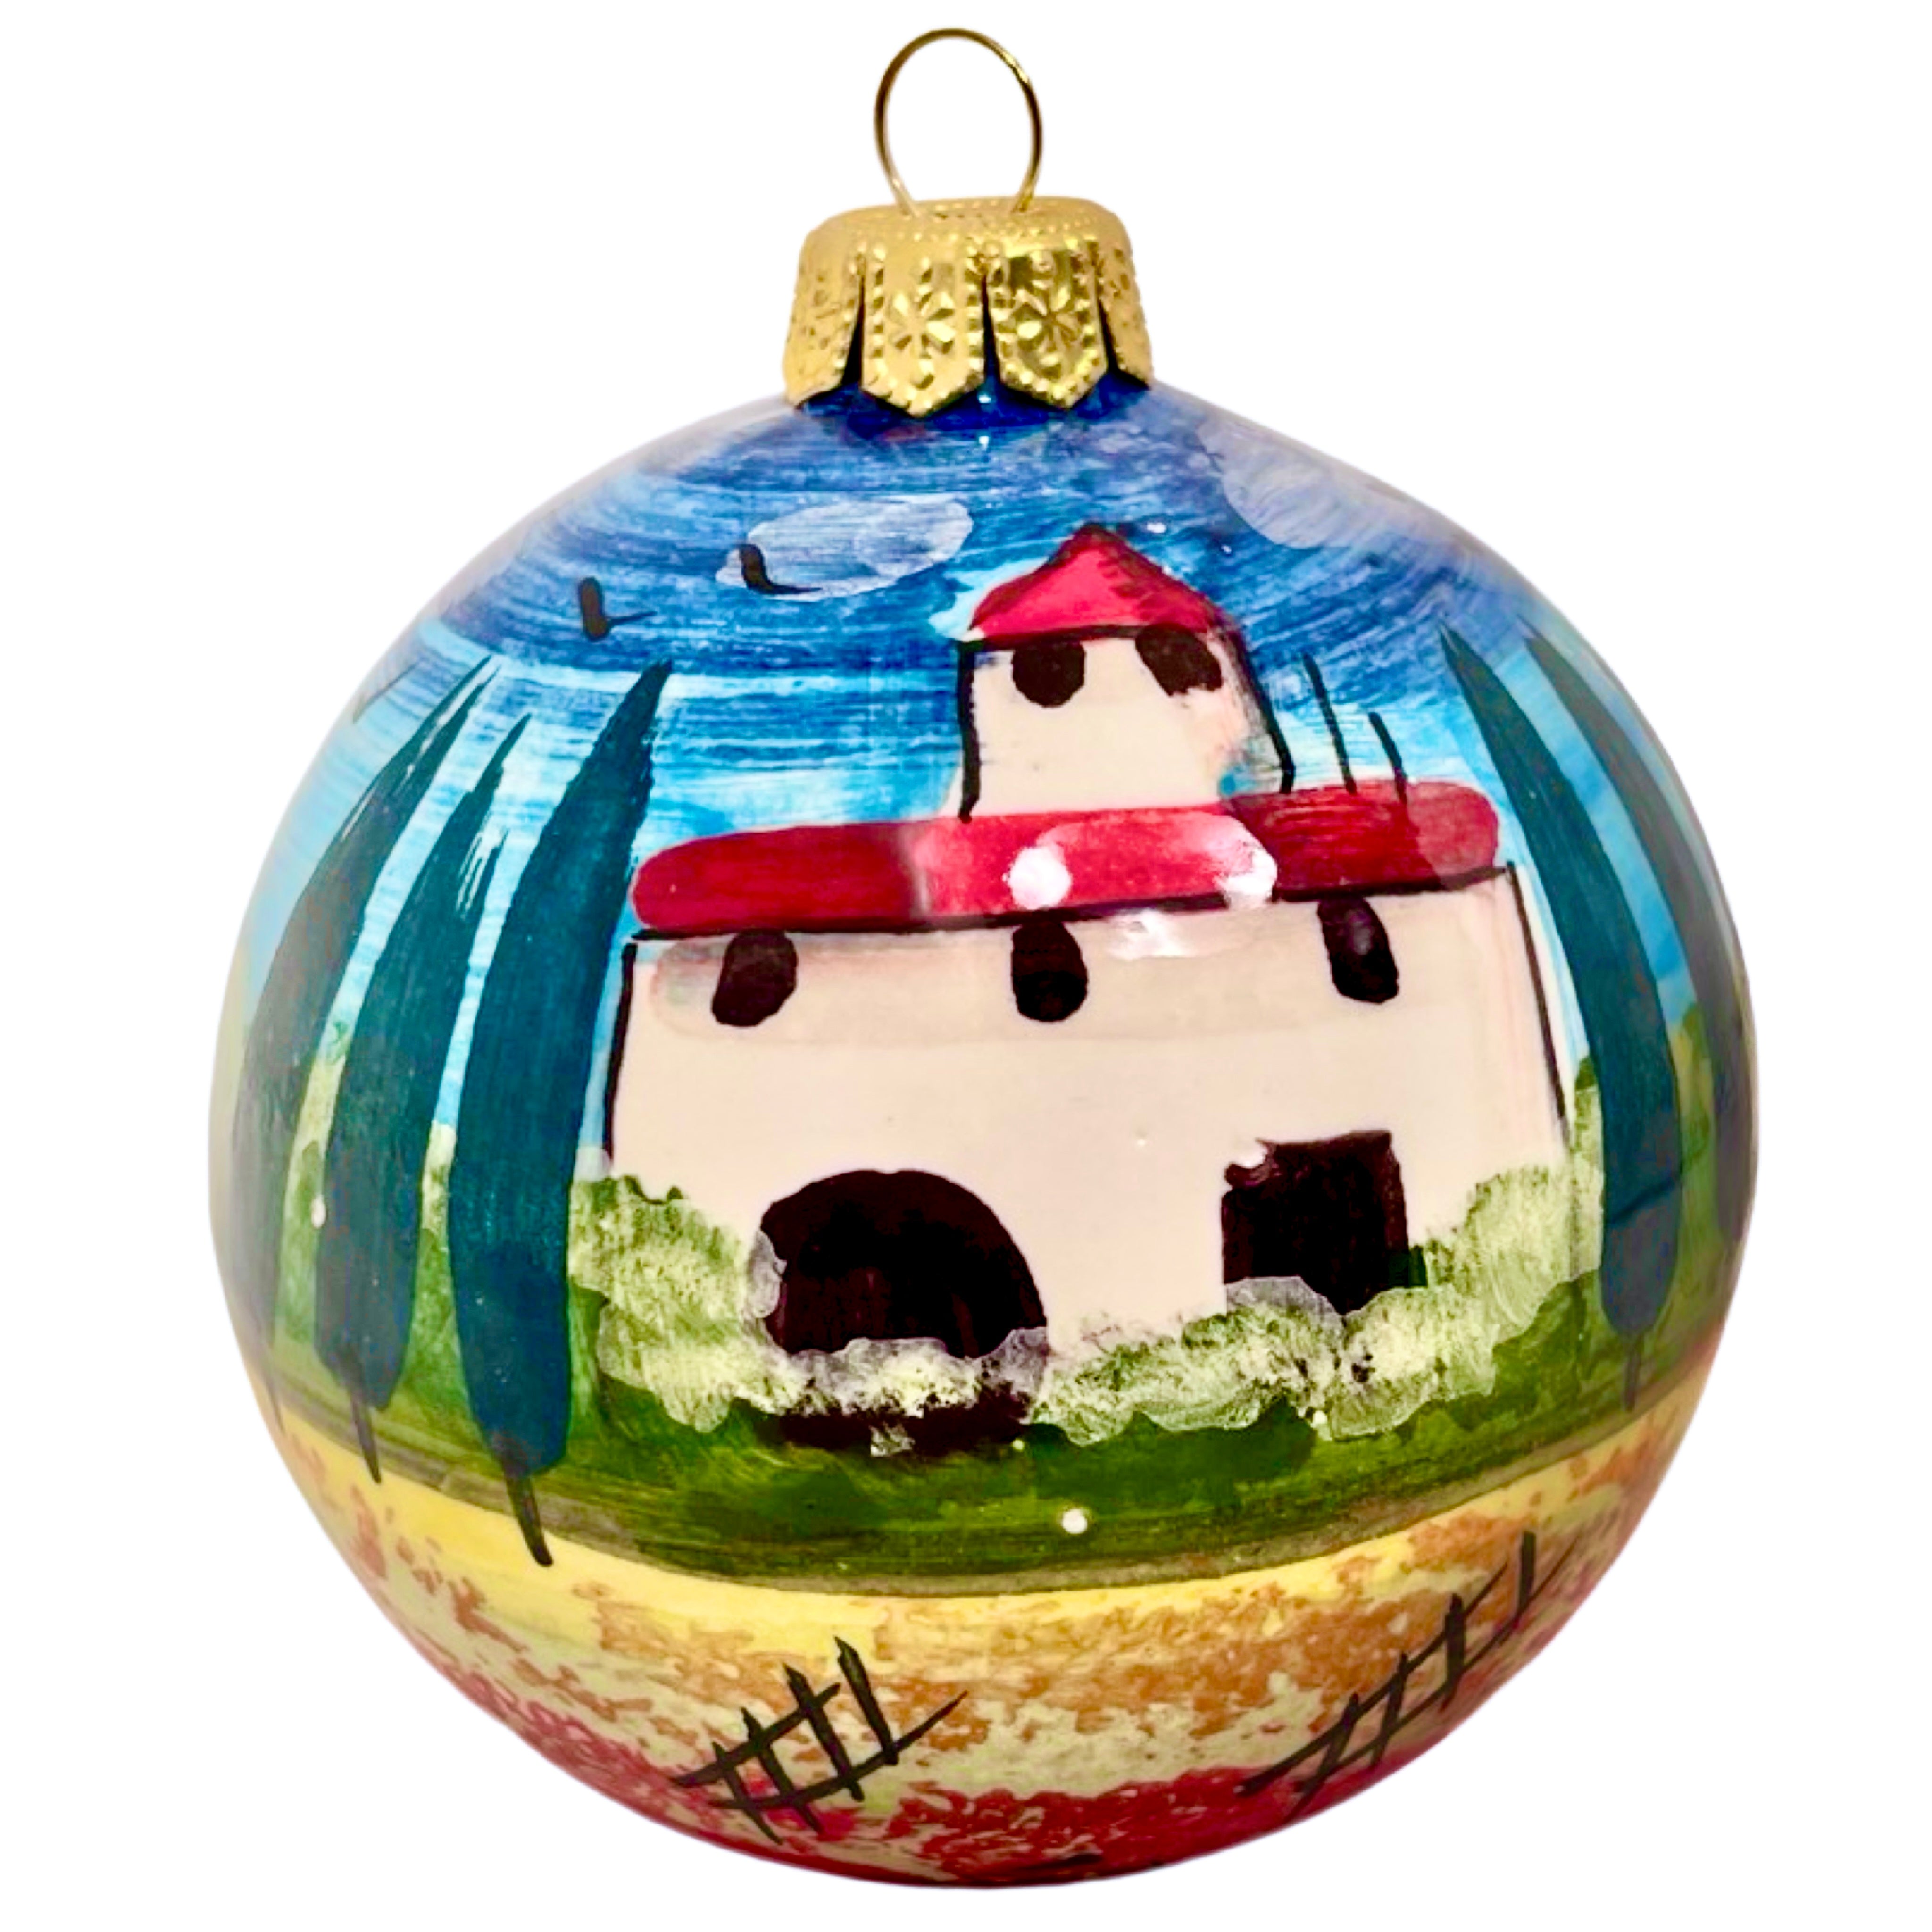 Tuscan Countryside Estate Ornament